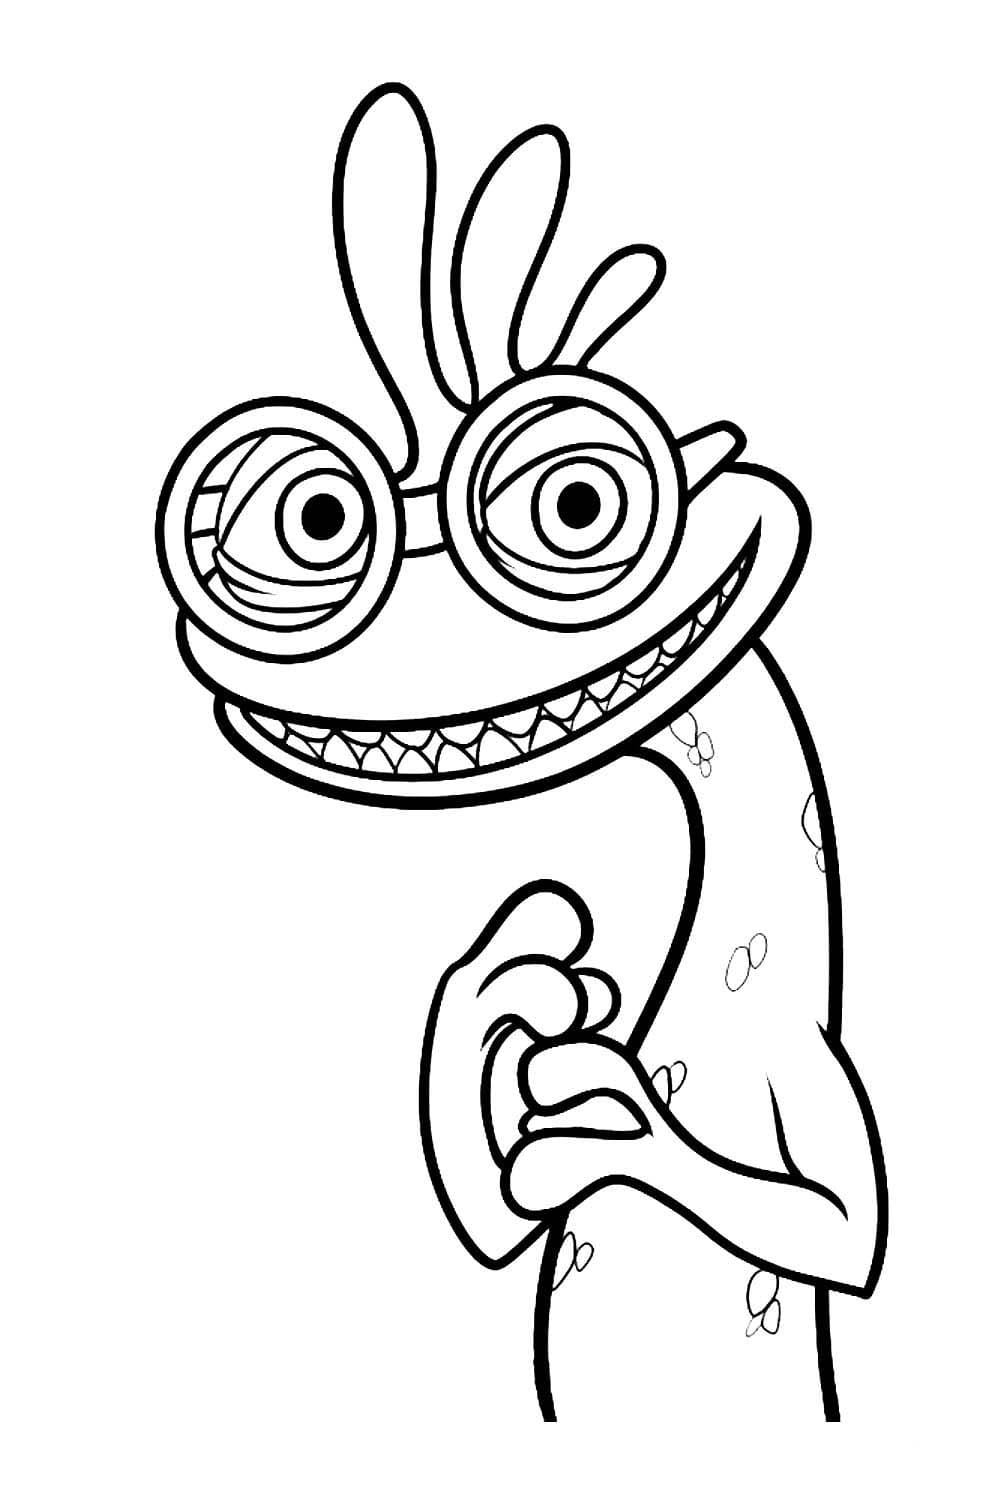 Printable Monsters Inc Coloring Pages The BestWebsite